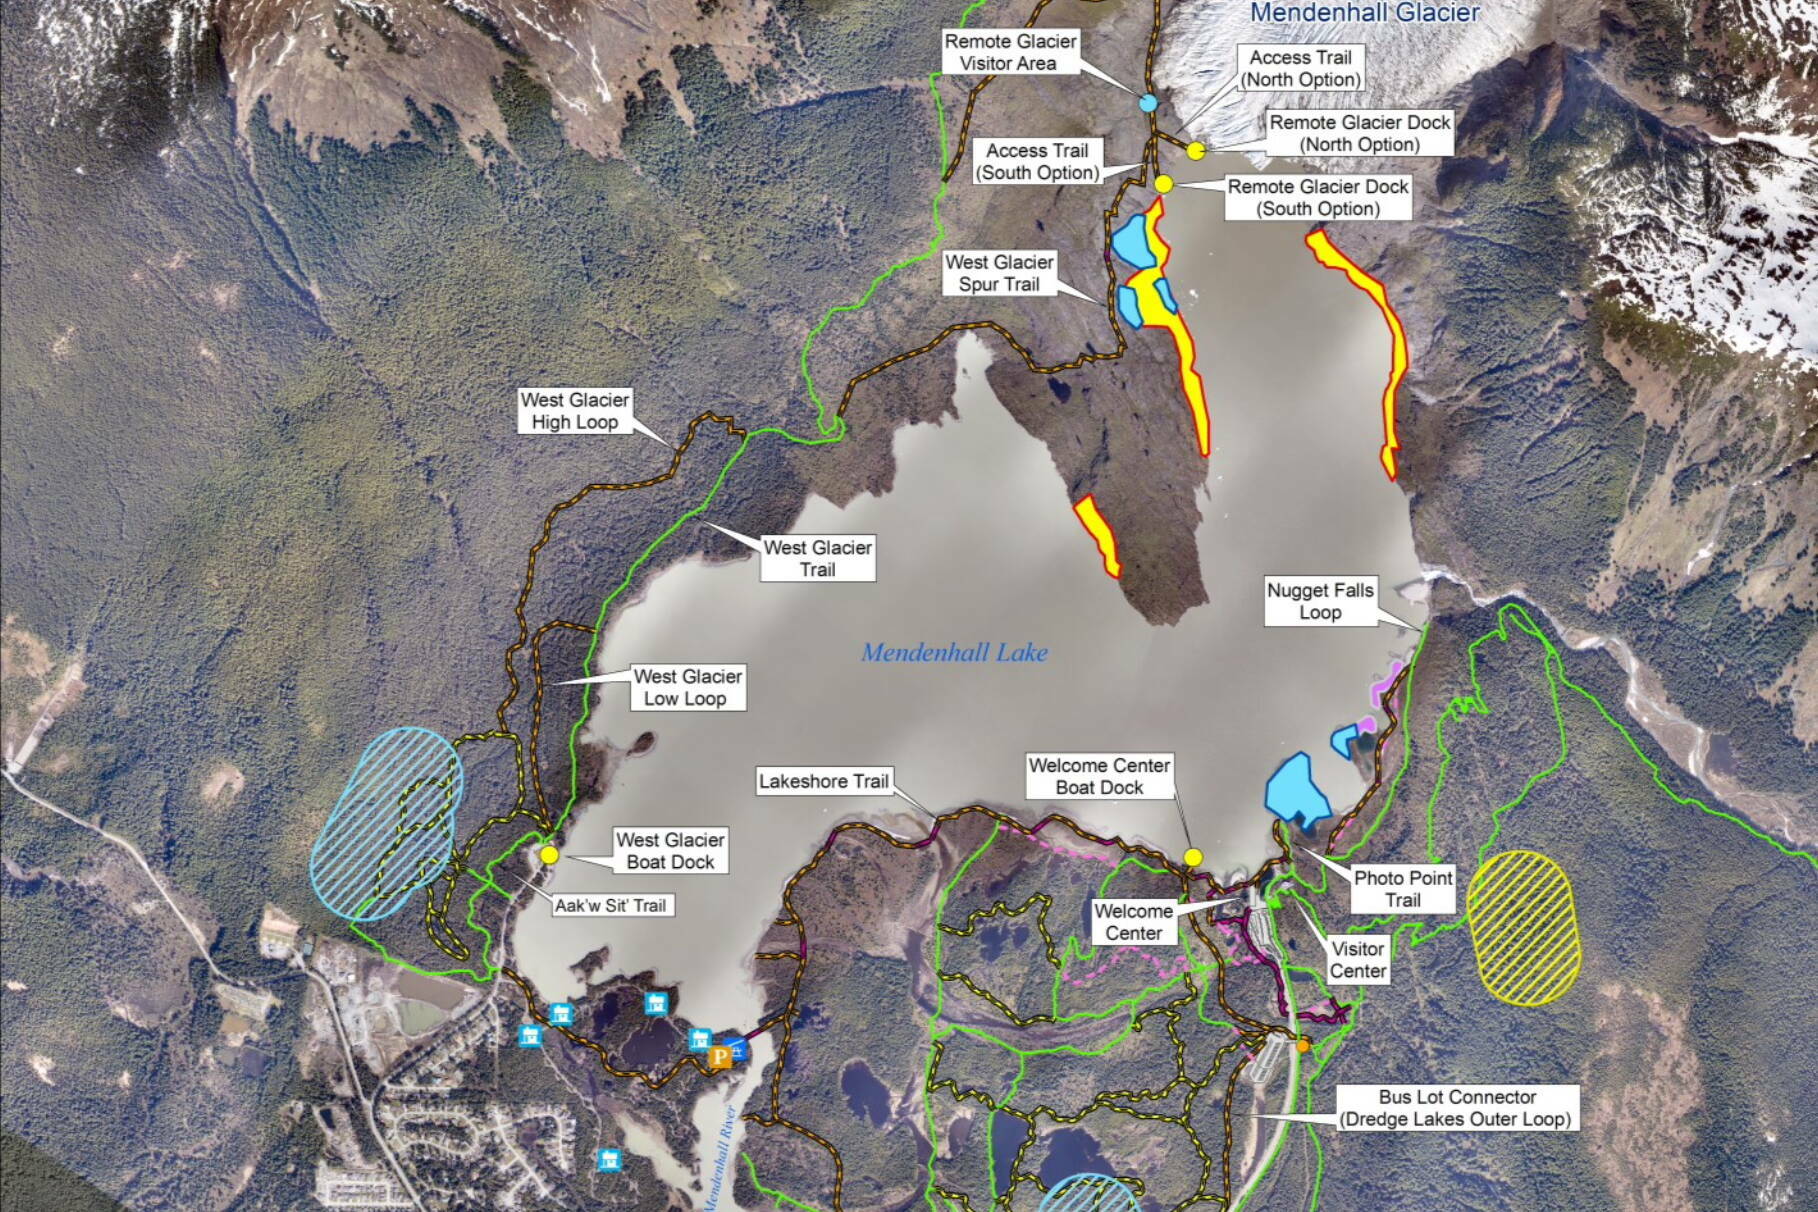 A map showing Alternative 2, the most aggressive of seven options for expanding the Mendenhall Glacier Recreational Area, highlights key features that would be subject to various levels of development. (U.S. Forest Service)